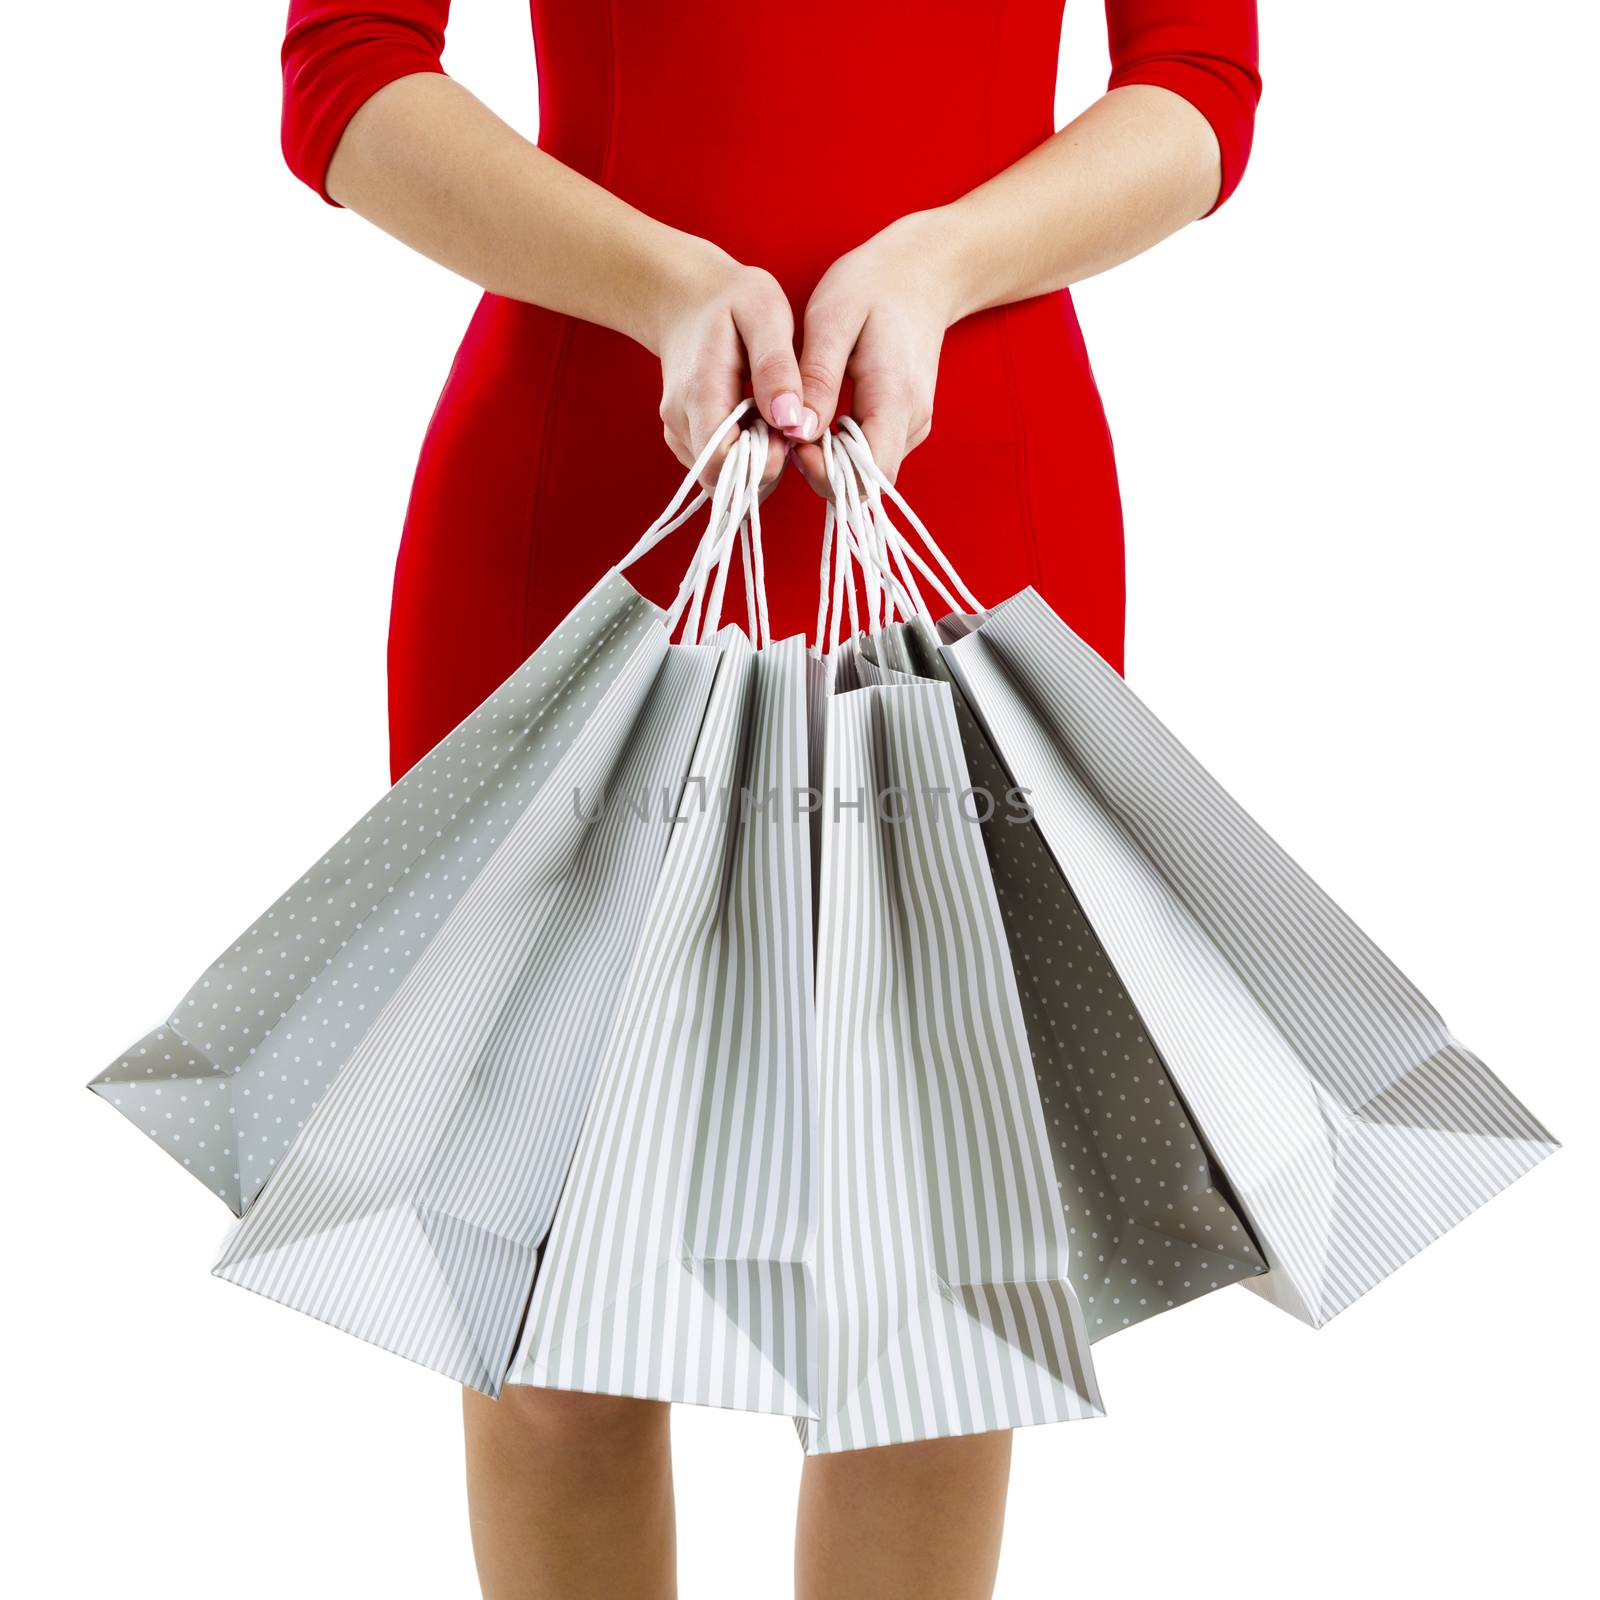 Woman with shopping bags by Iko